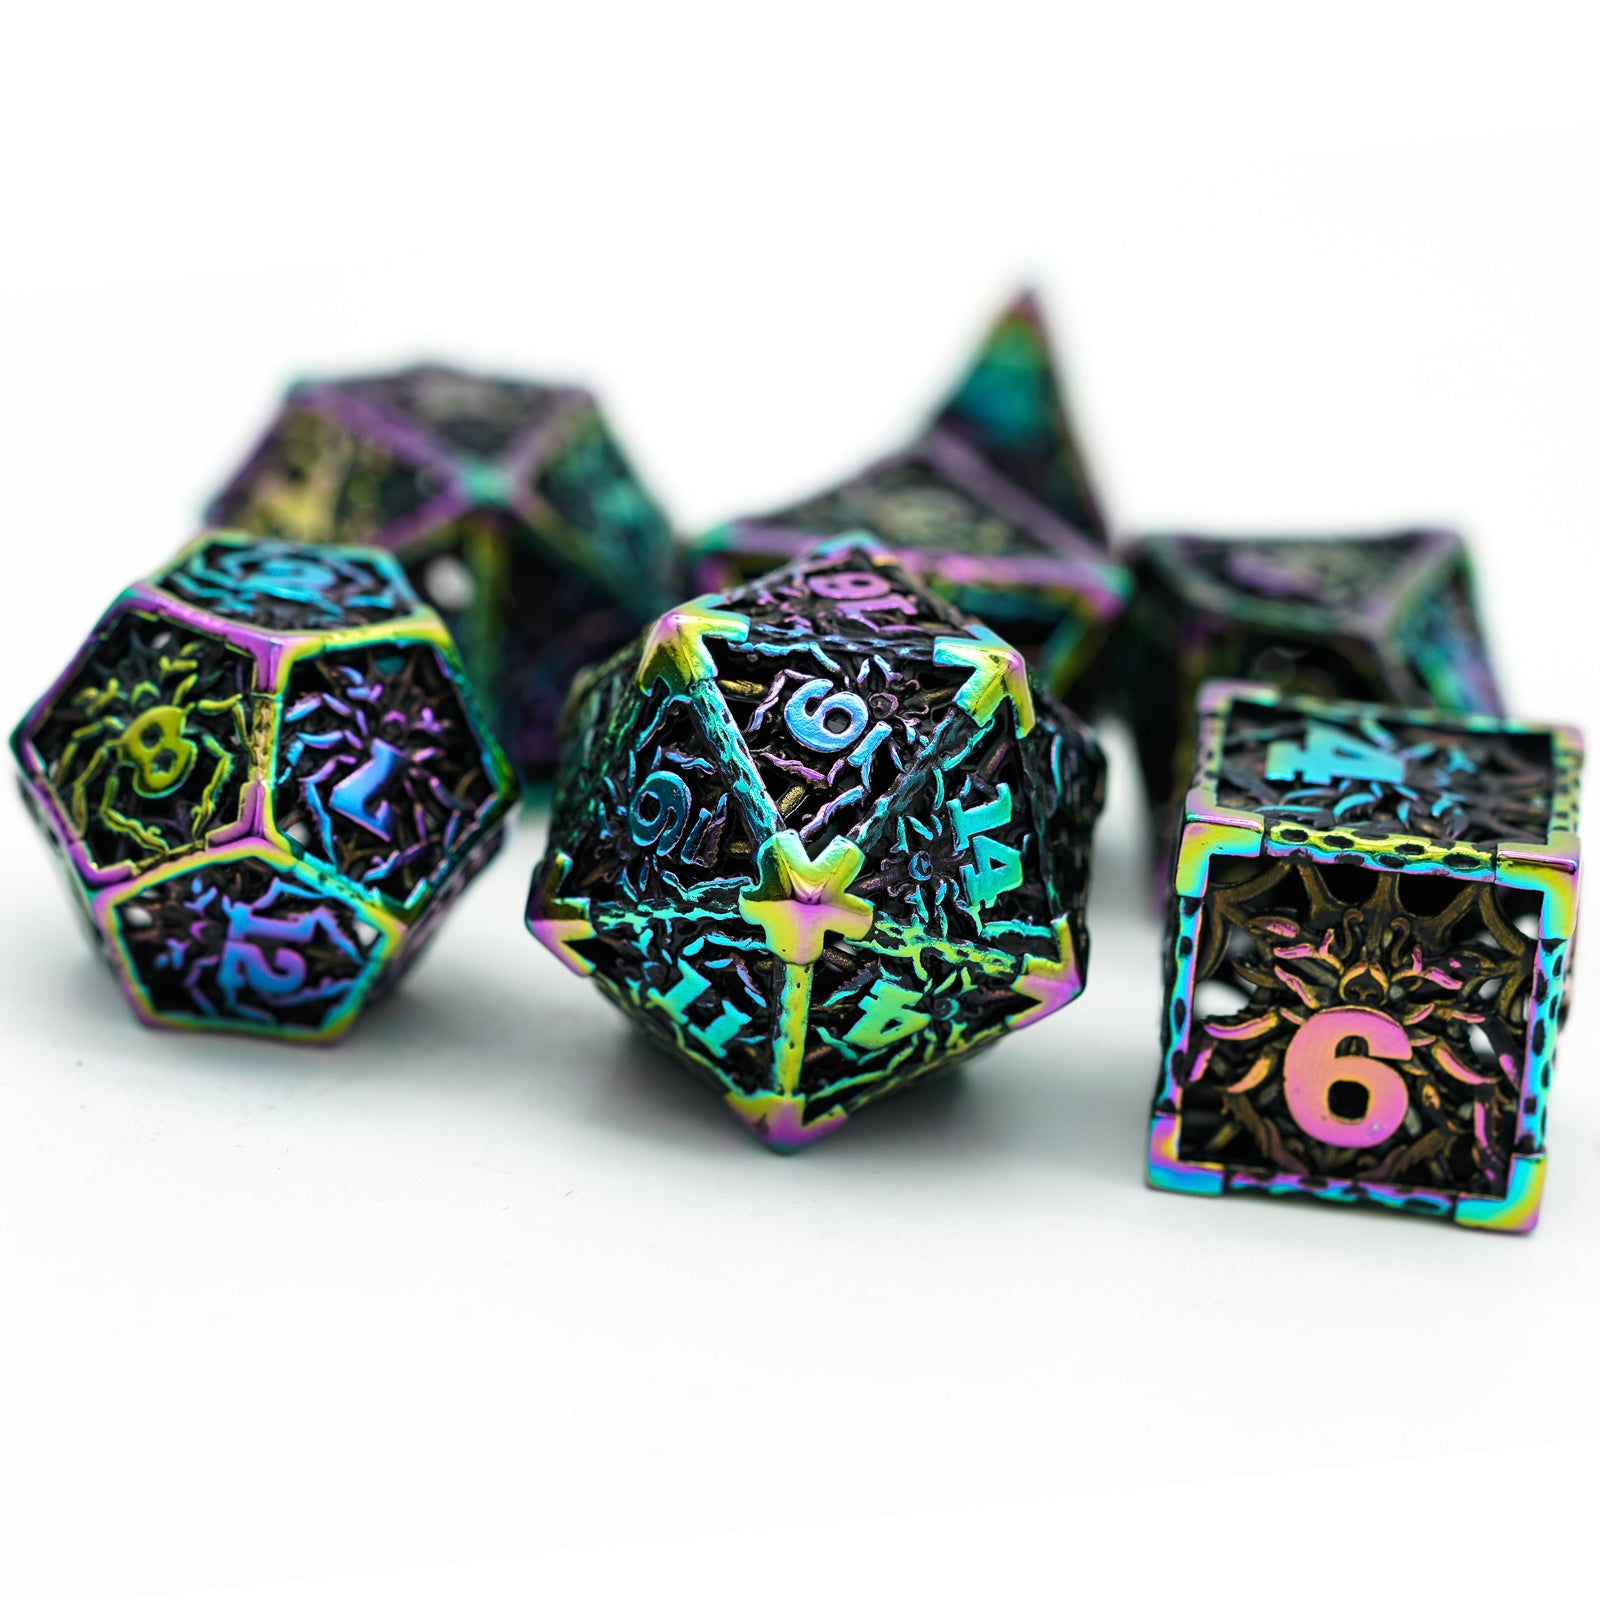 dark metal dice set with multicolored edges and numbers